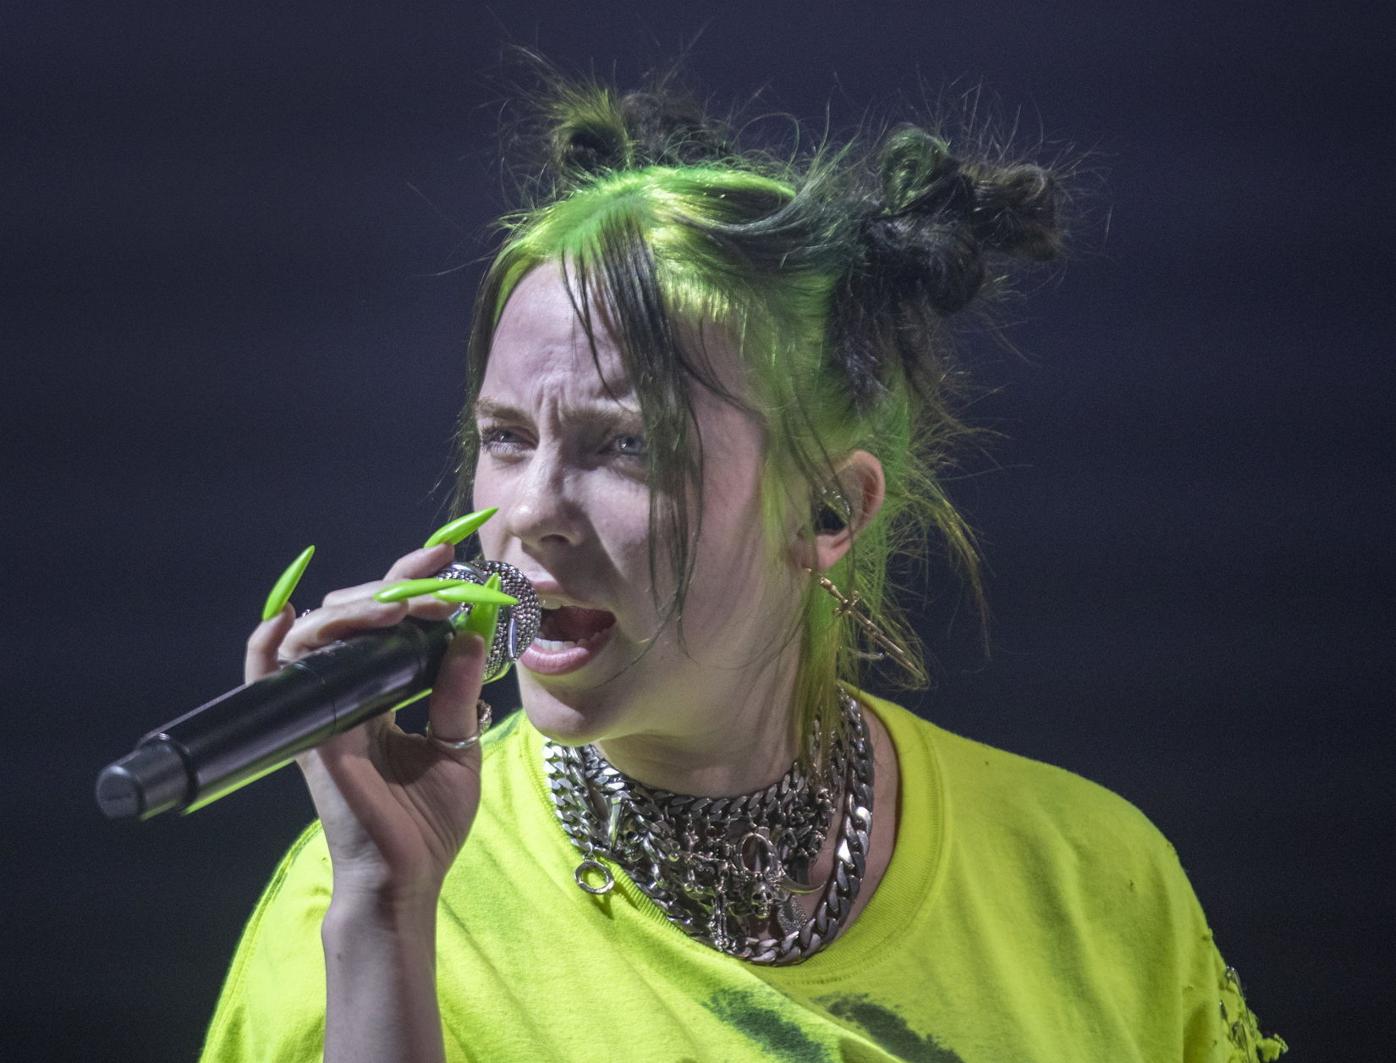 Billie Eilish reveals she watched porn at young age, calls it 'a disgrace